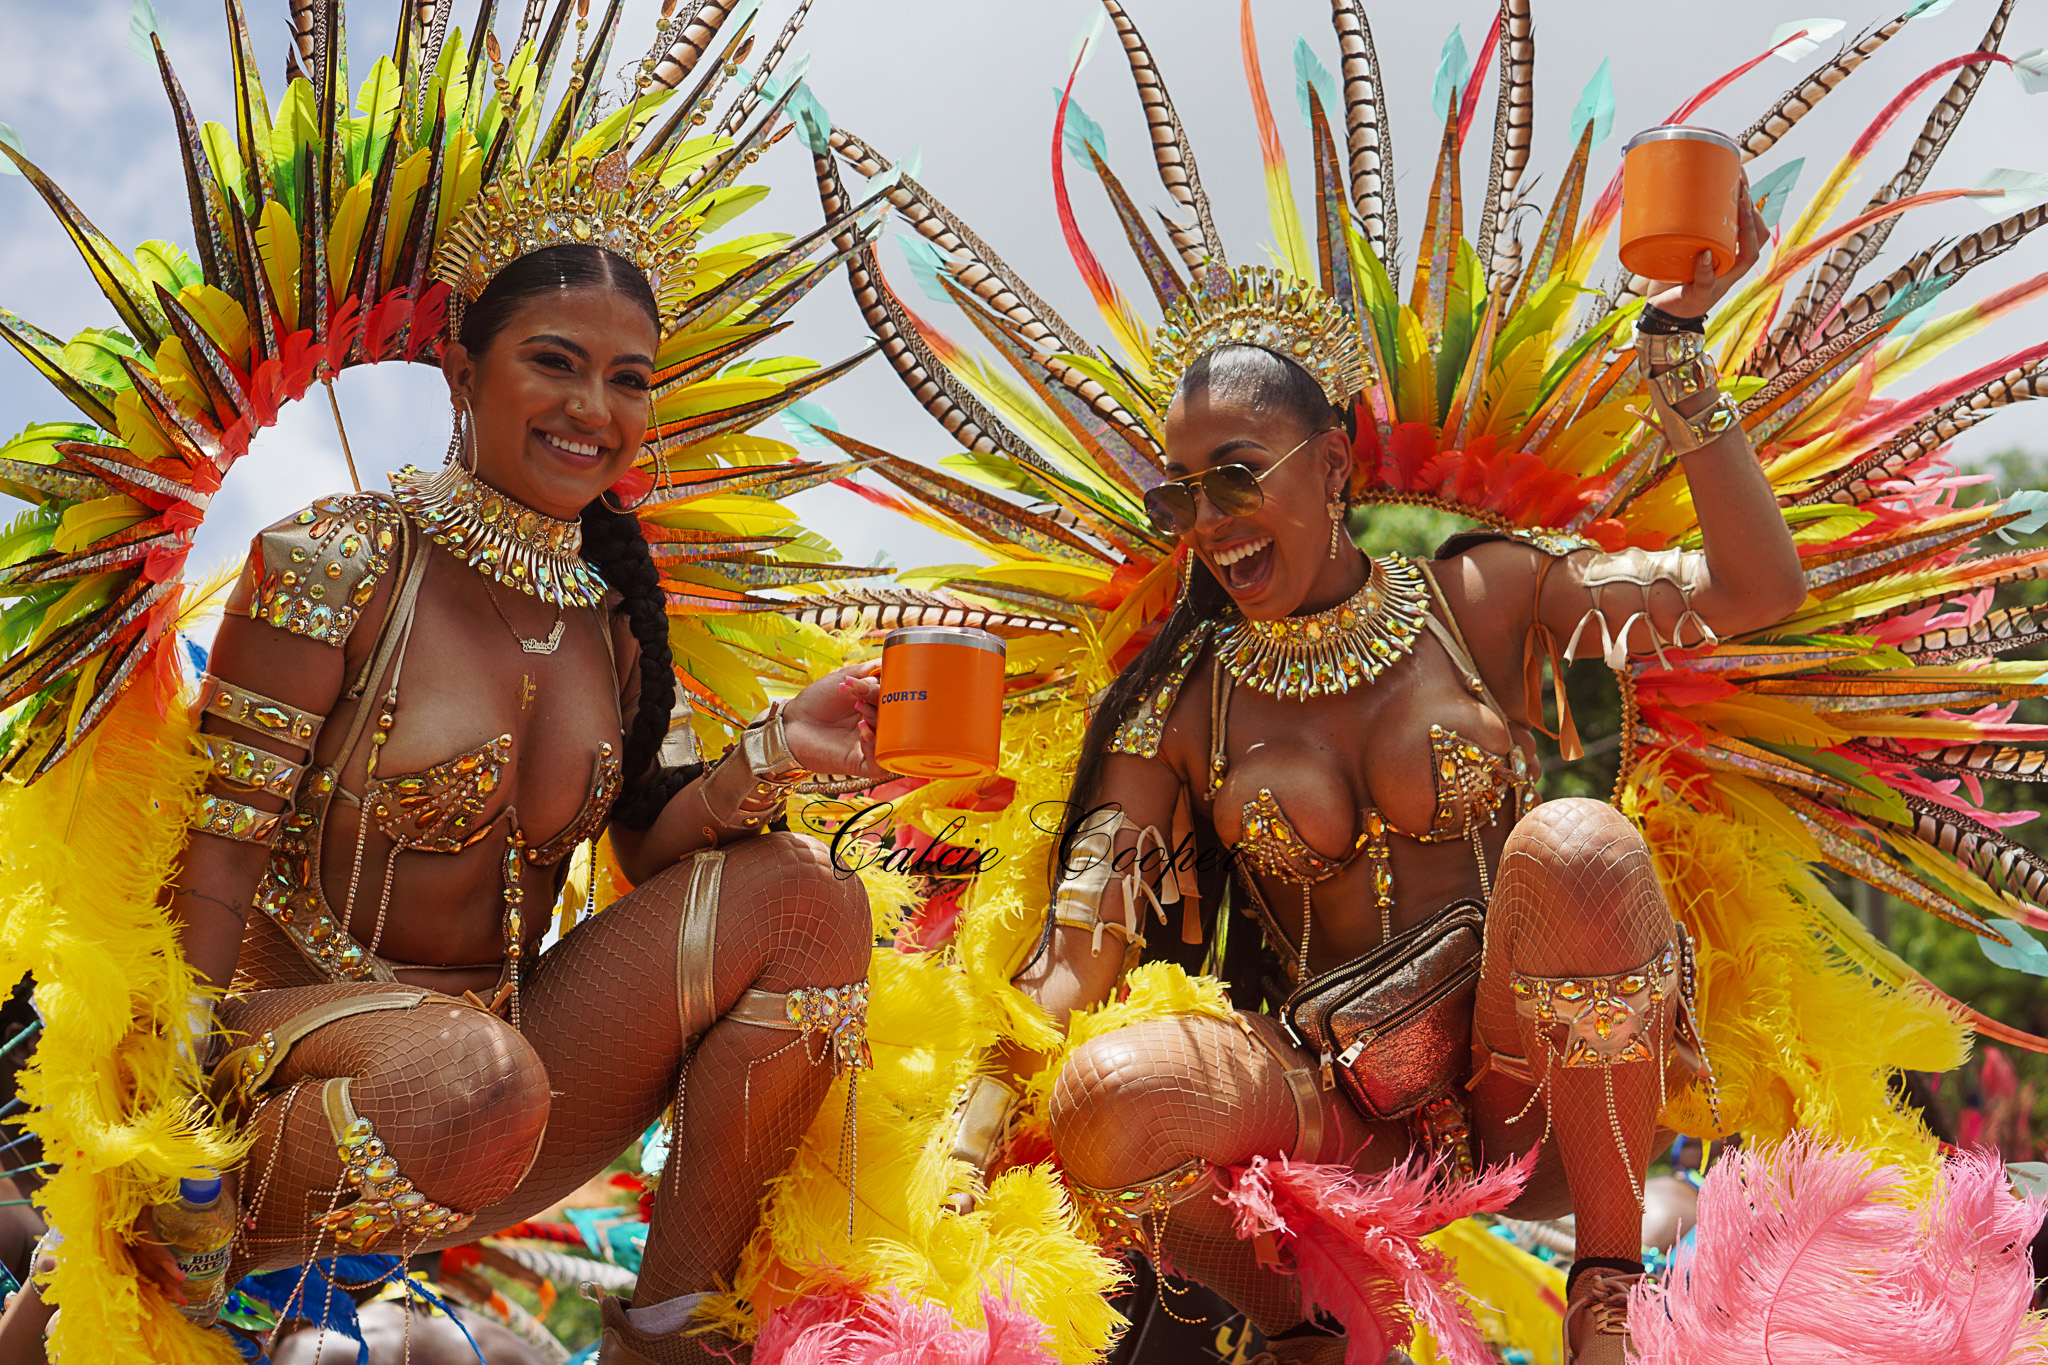 Beautiful women at St Lucia Carnival Smiliing